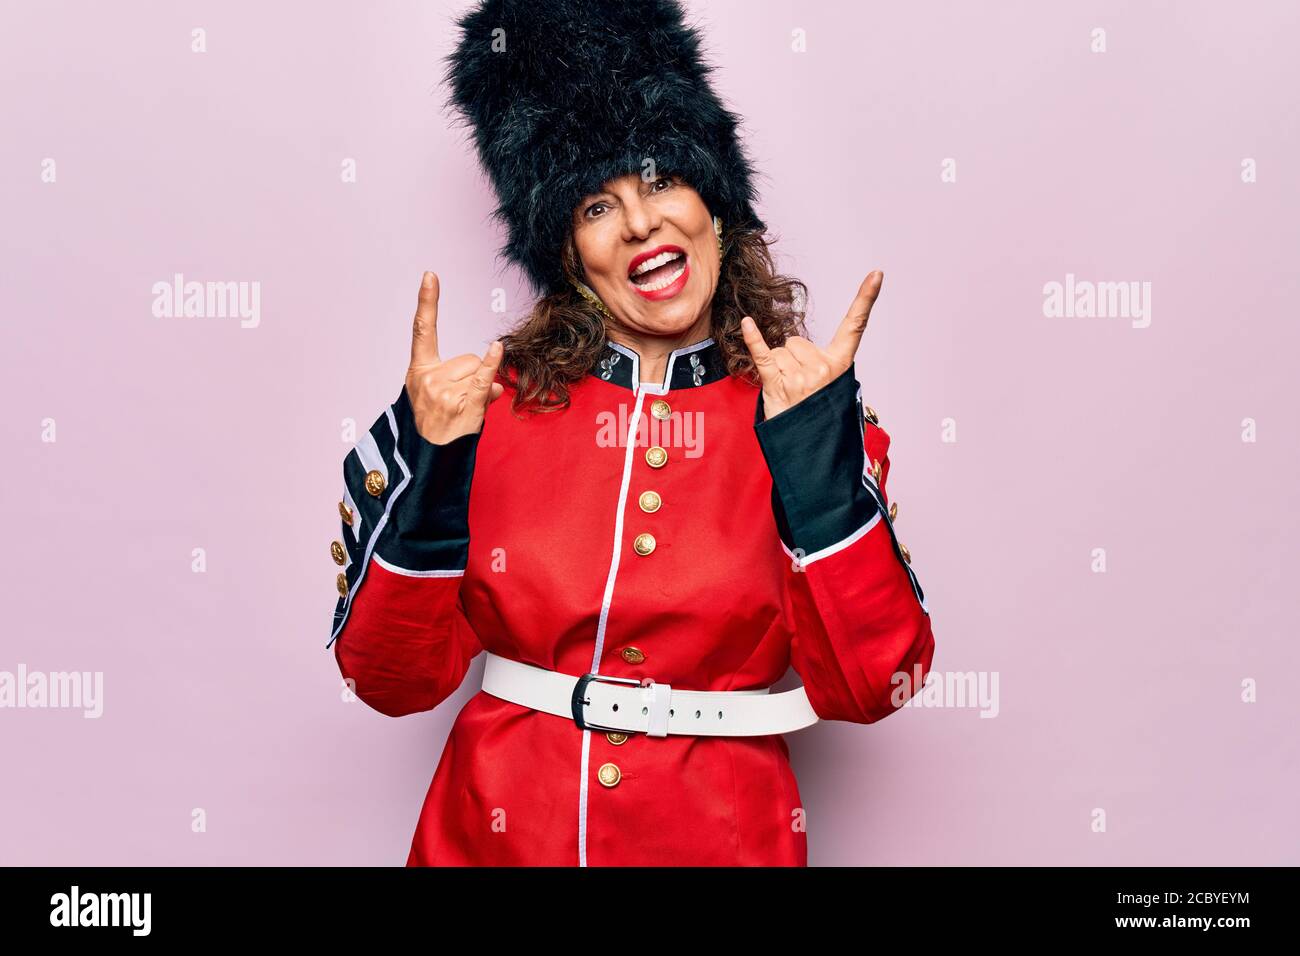 Middle age beautiful wales guard woman wearing traditional uniform over pink background shouting with crazy expression doing rock symbol with hands up Stock Photo